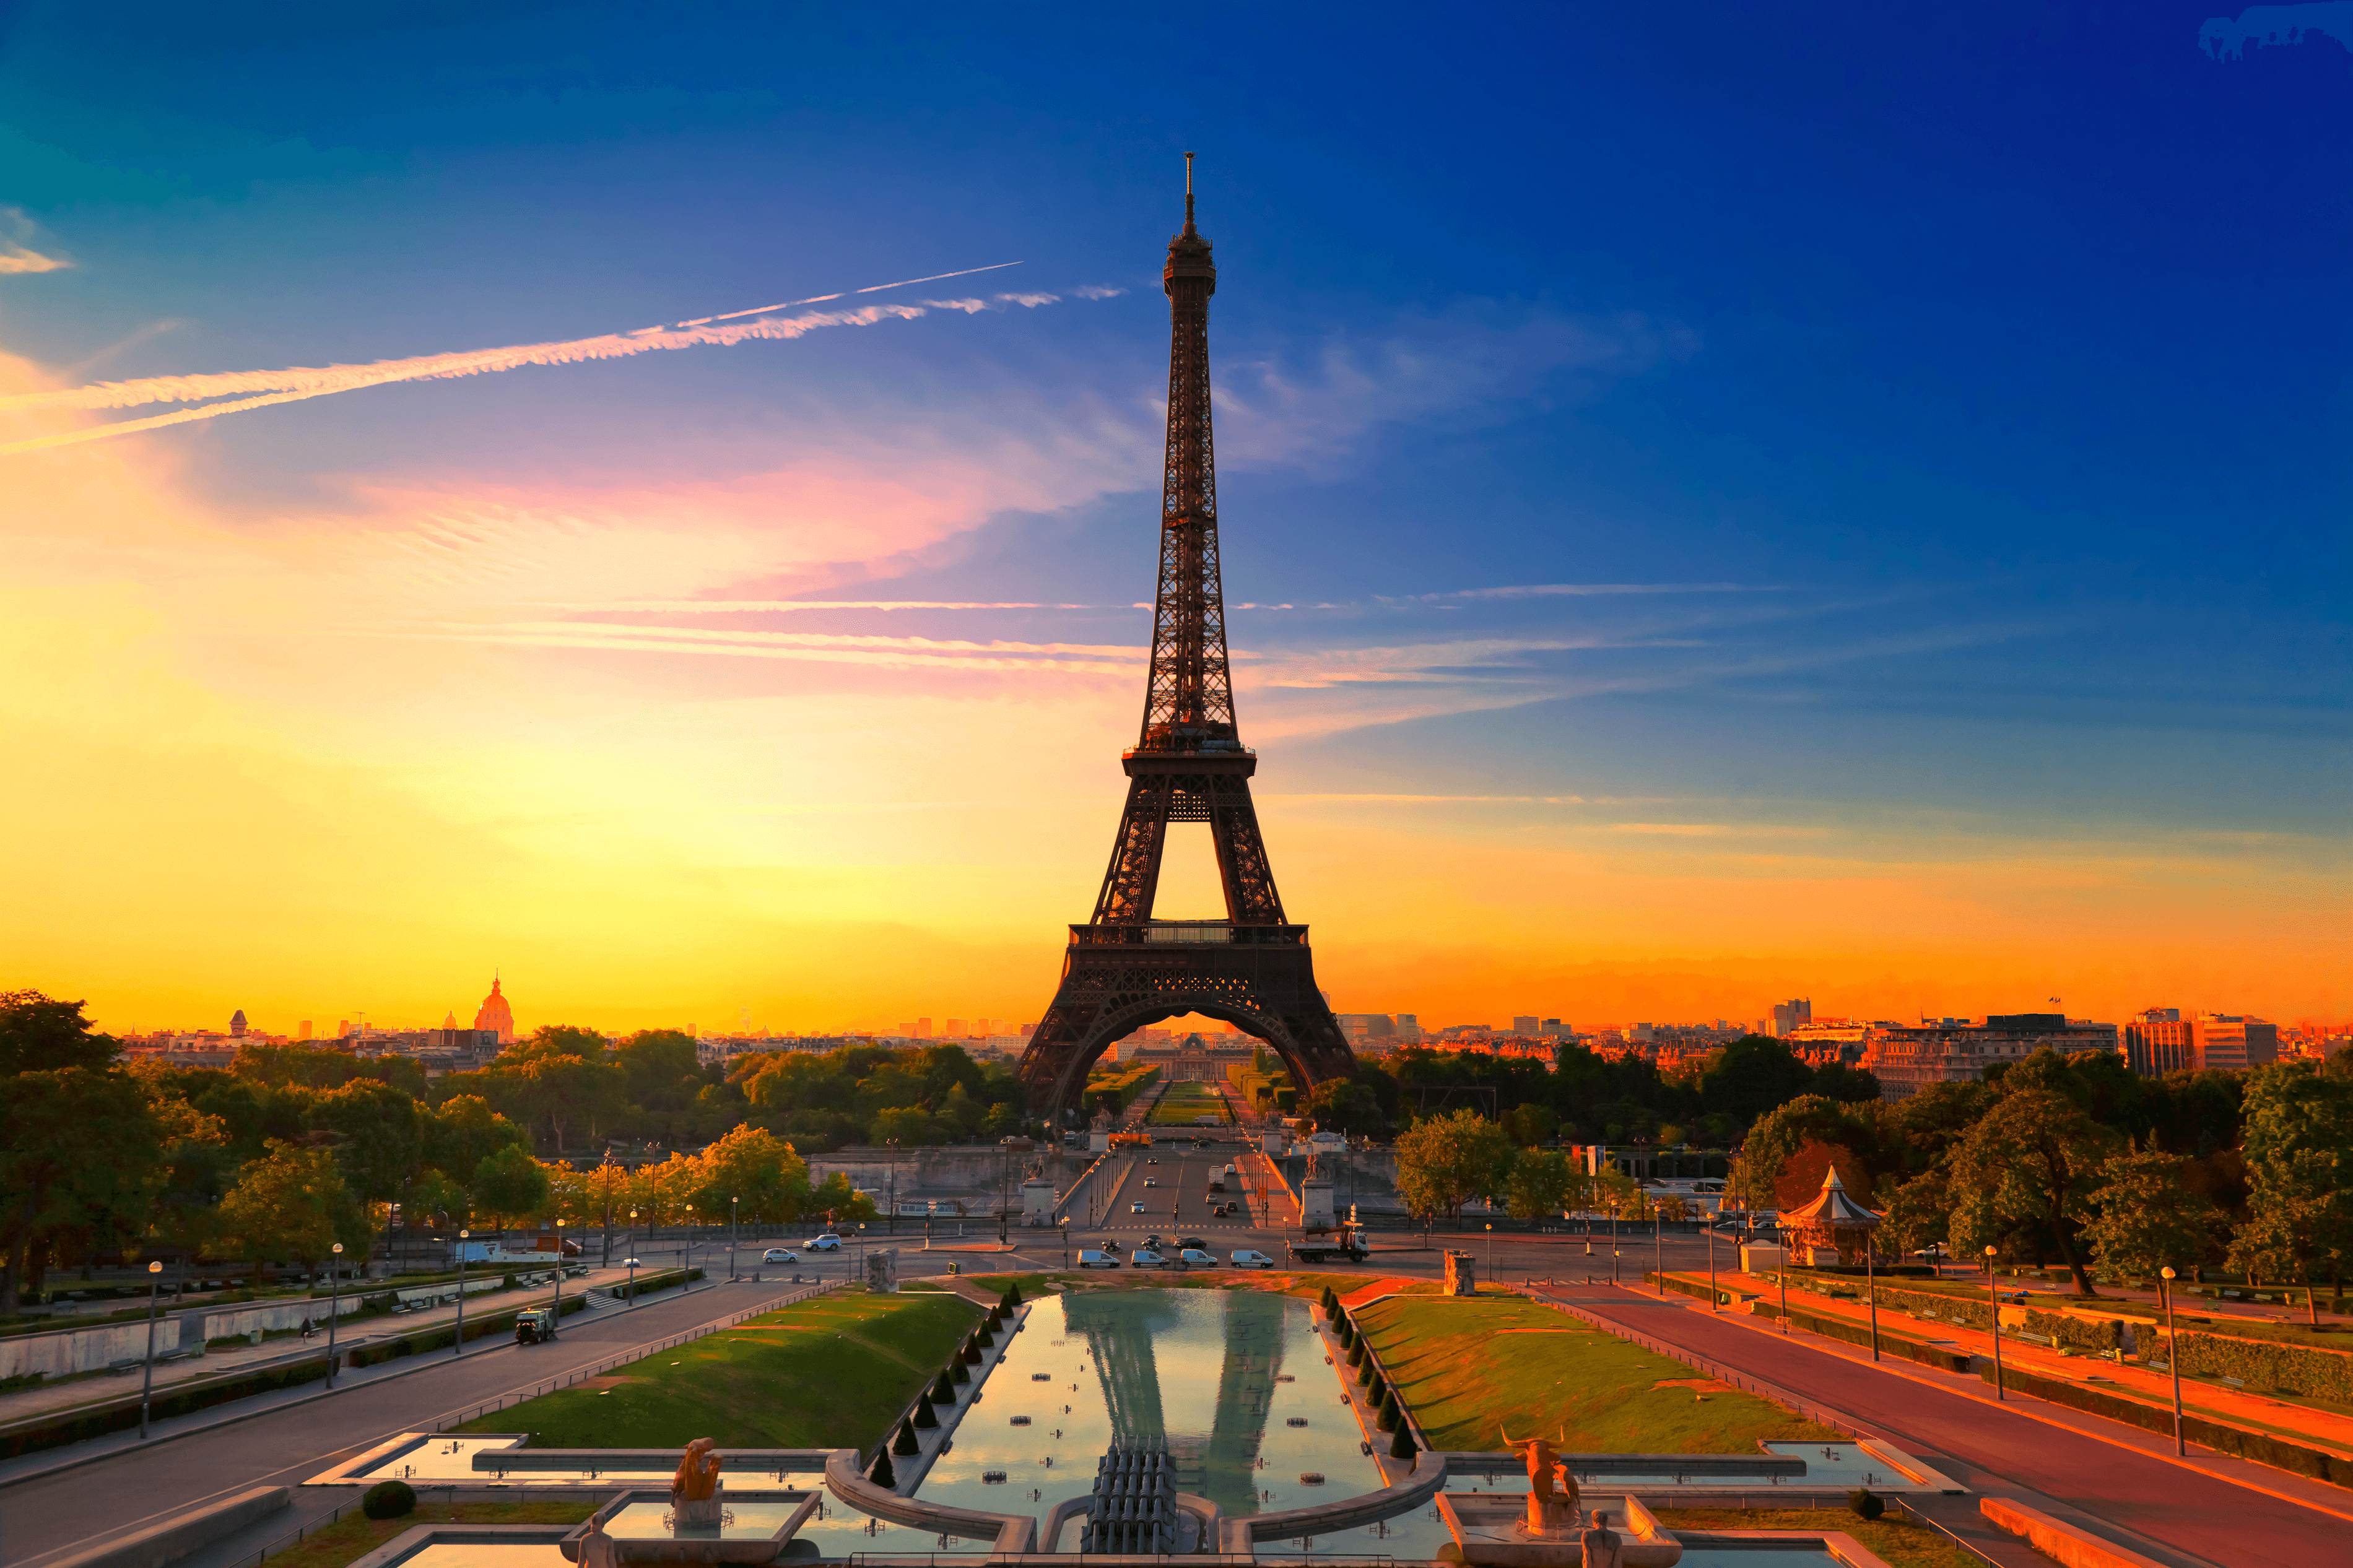 Eiffel Tower View at Sunrise